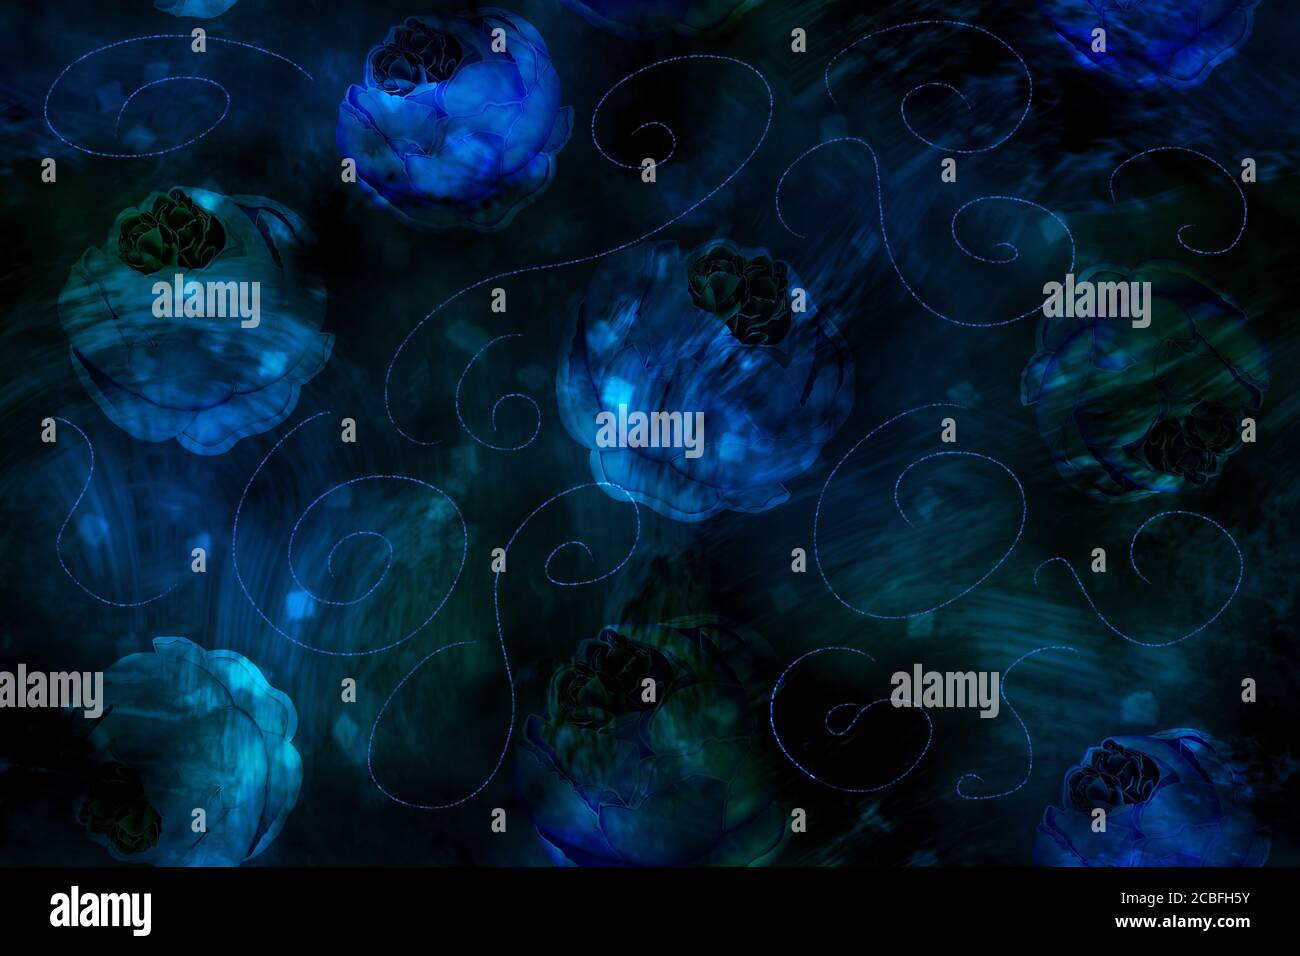 Seamless darl blue abstract pattern with peonies. Digital art. Stock Photo